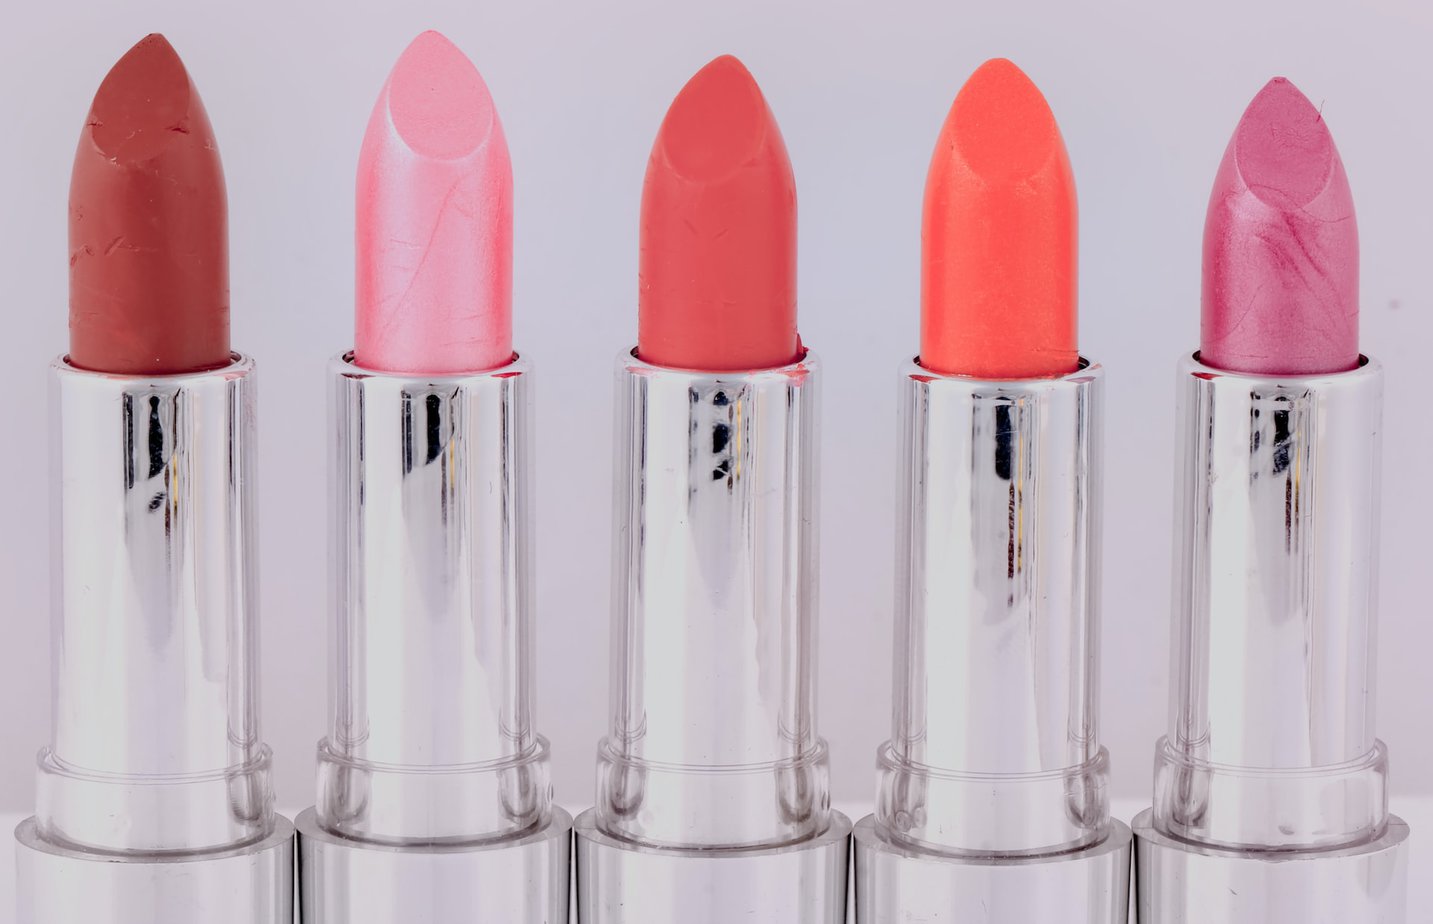 Lipstick shades that go great with tanned skin!